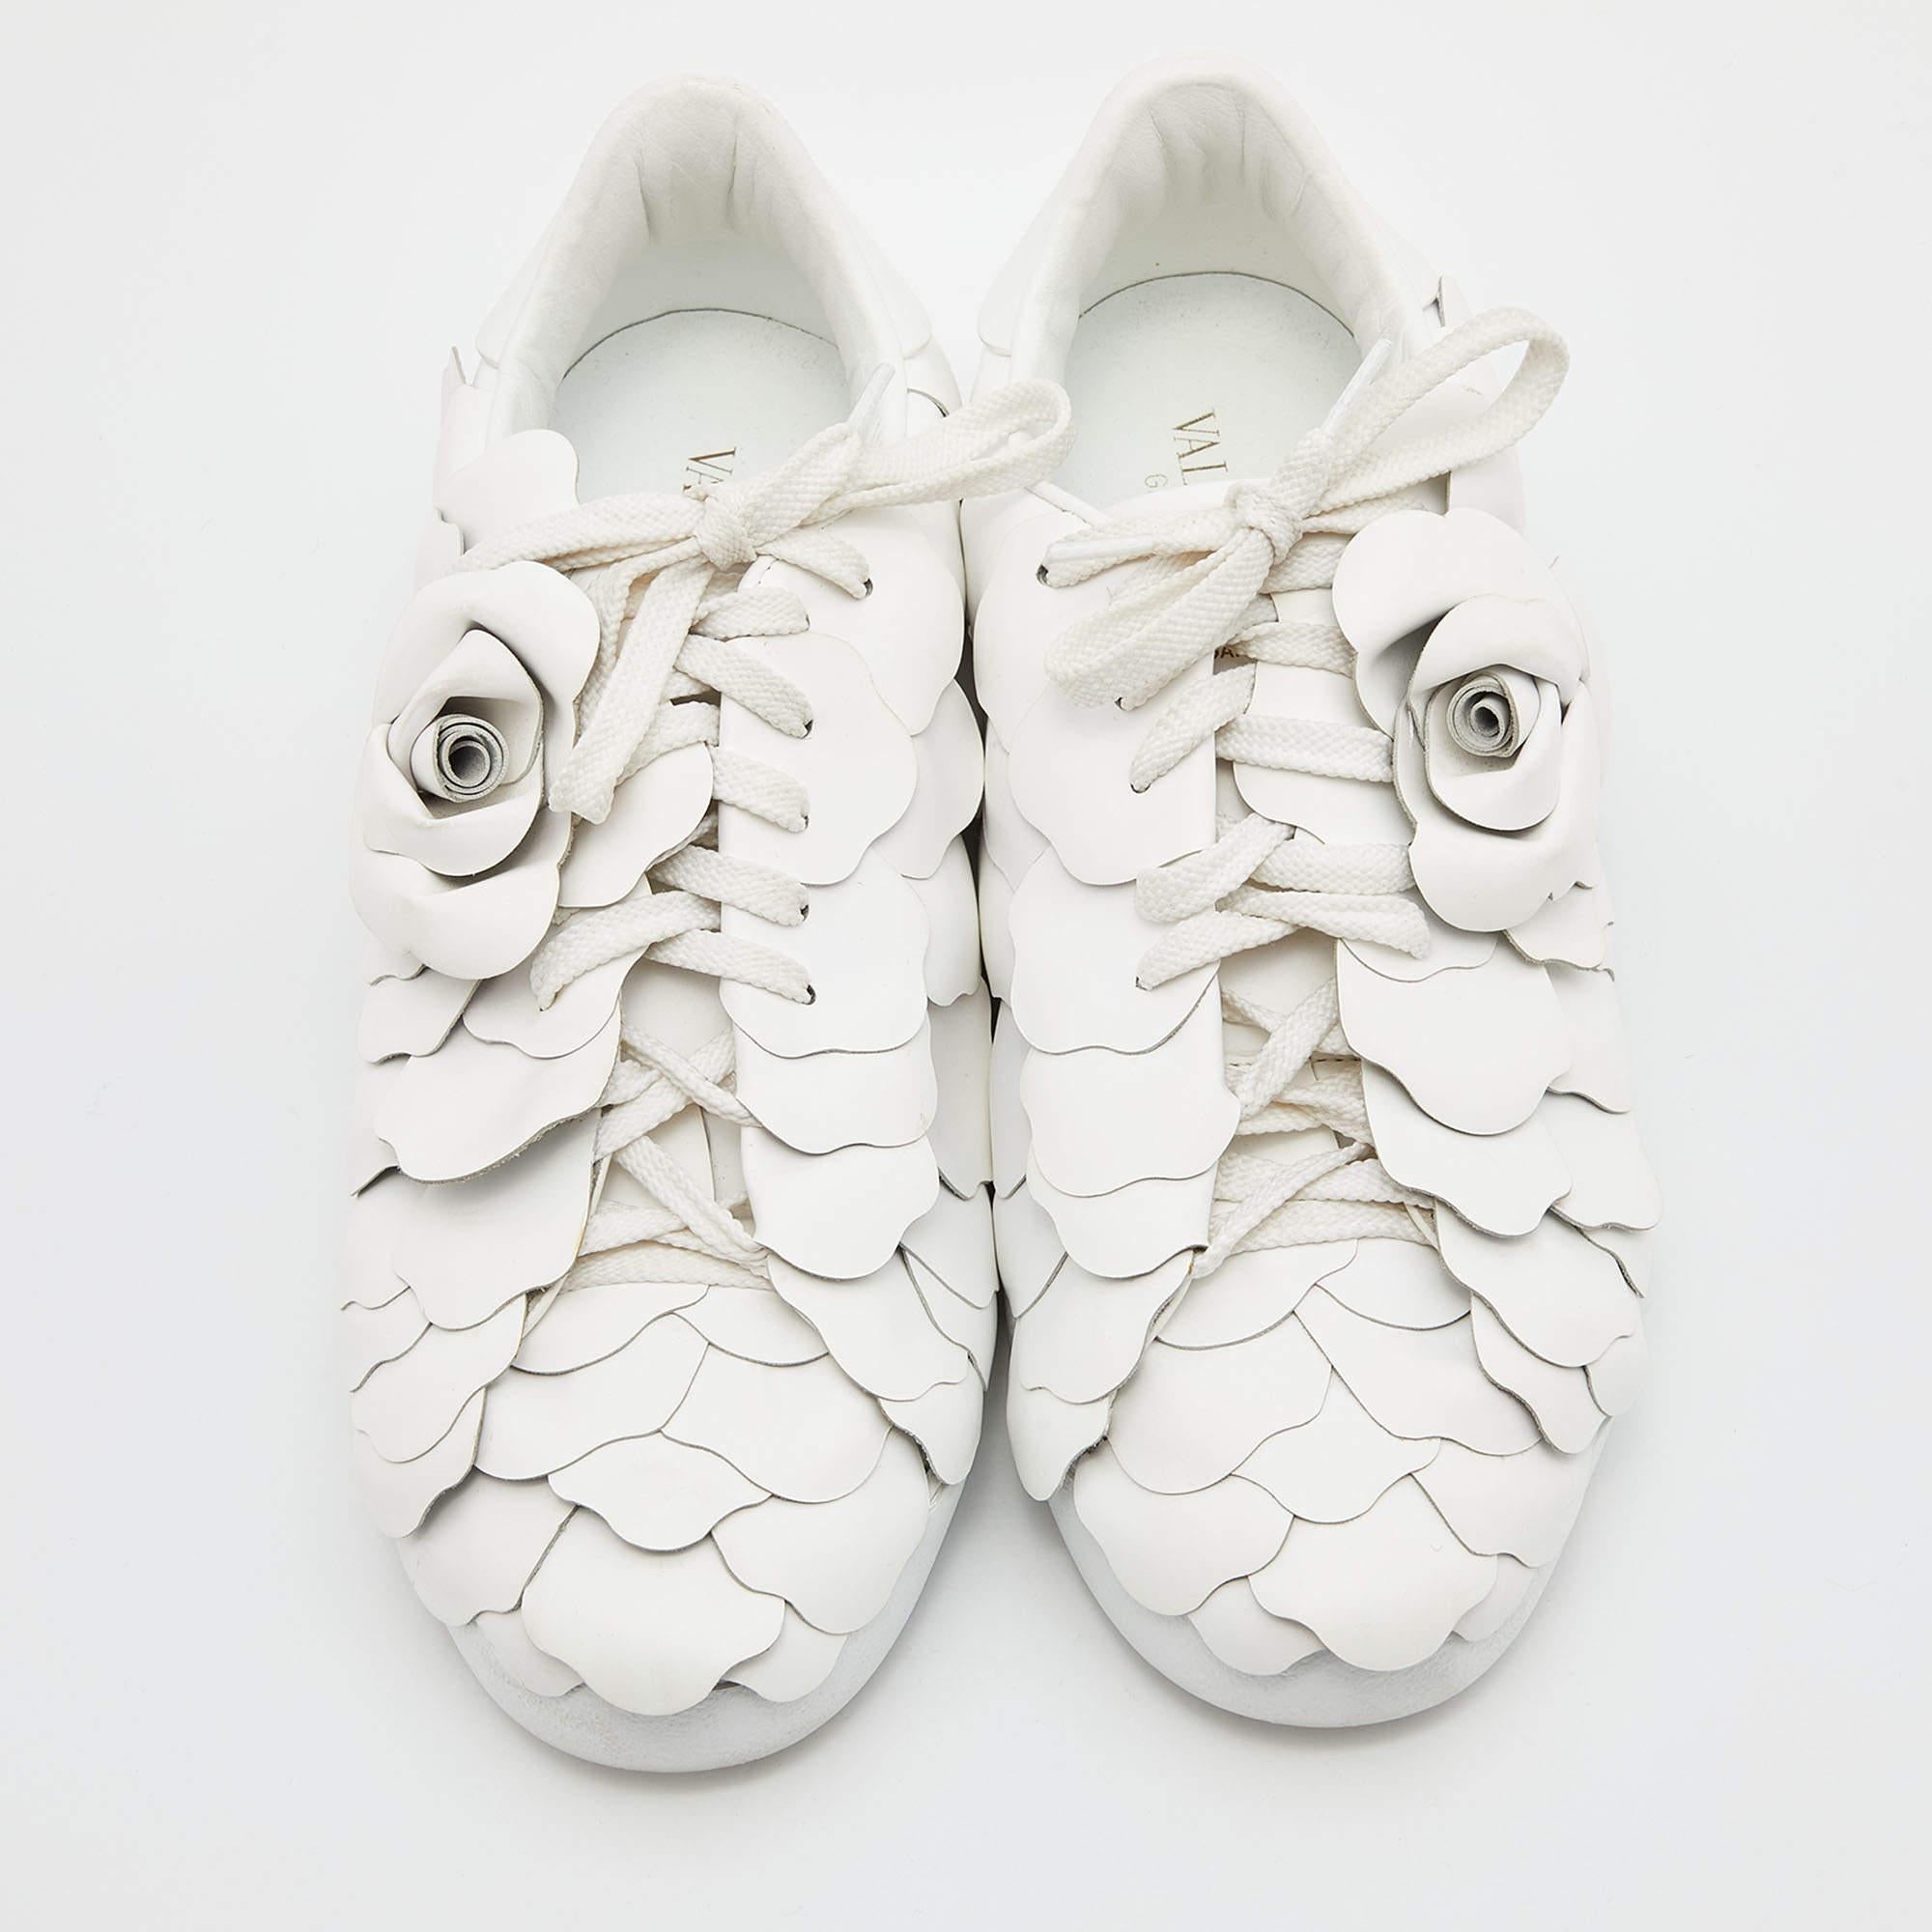 These Valentino sneakers come bearing the rose—a symbol of timeless beauty present in many of the brand's designs. The Atelier 03 Rose Edition pair, constructed using leather, feature a 3D rose detail on the uppers with varying sizes of leather